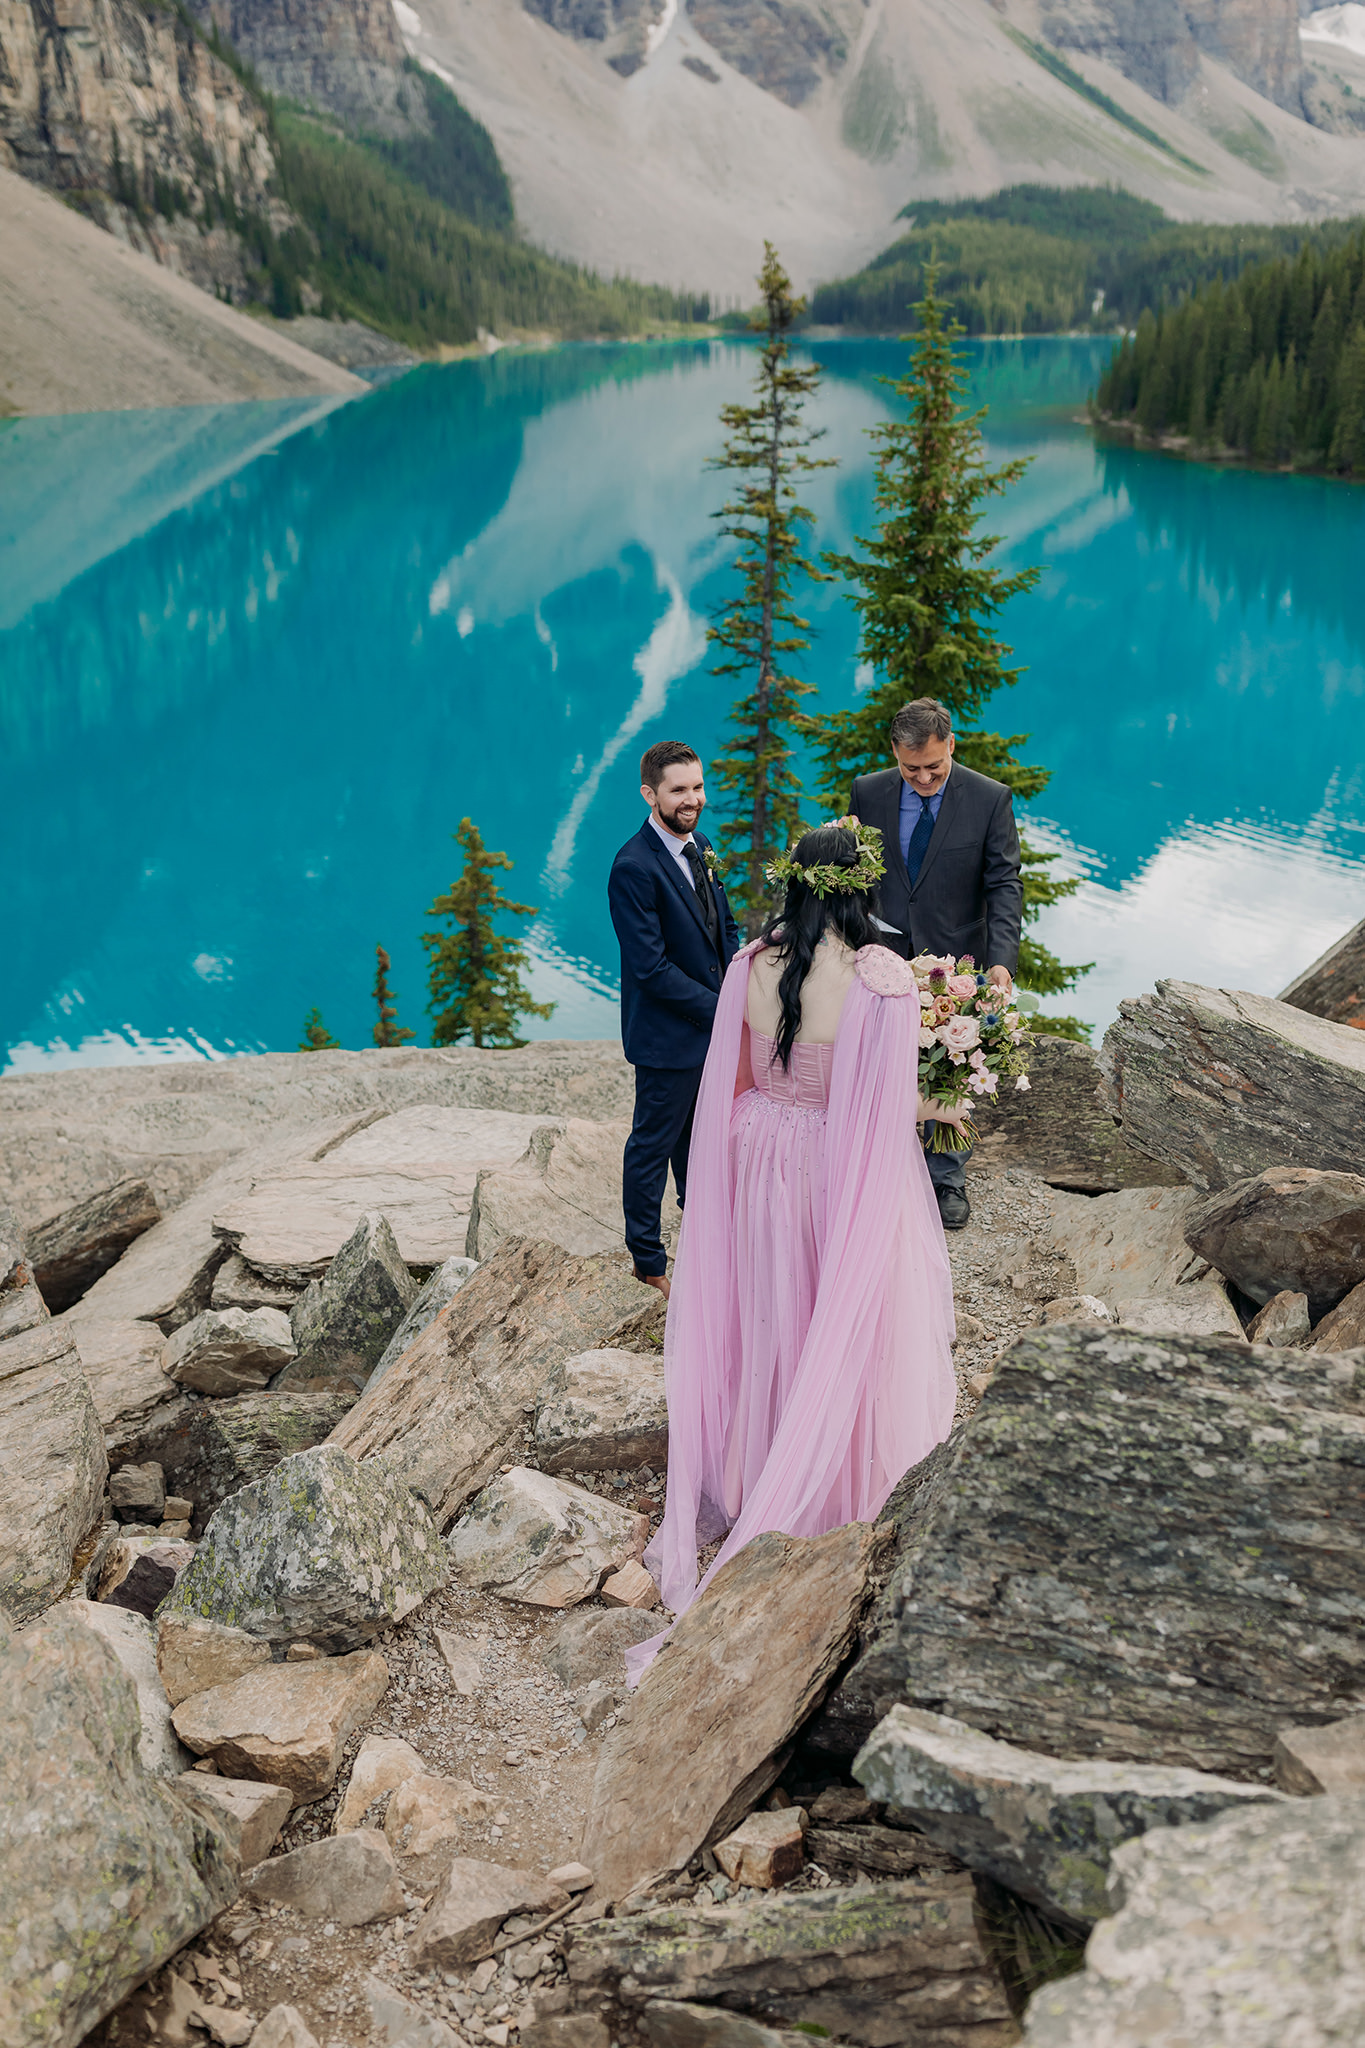 how to elope at moraine lake wedding ceremony for elopement atop the rockpile surrounded by mountains and reflecting turquoise waters